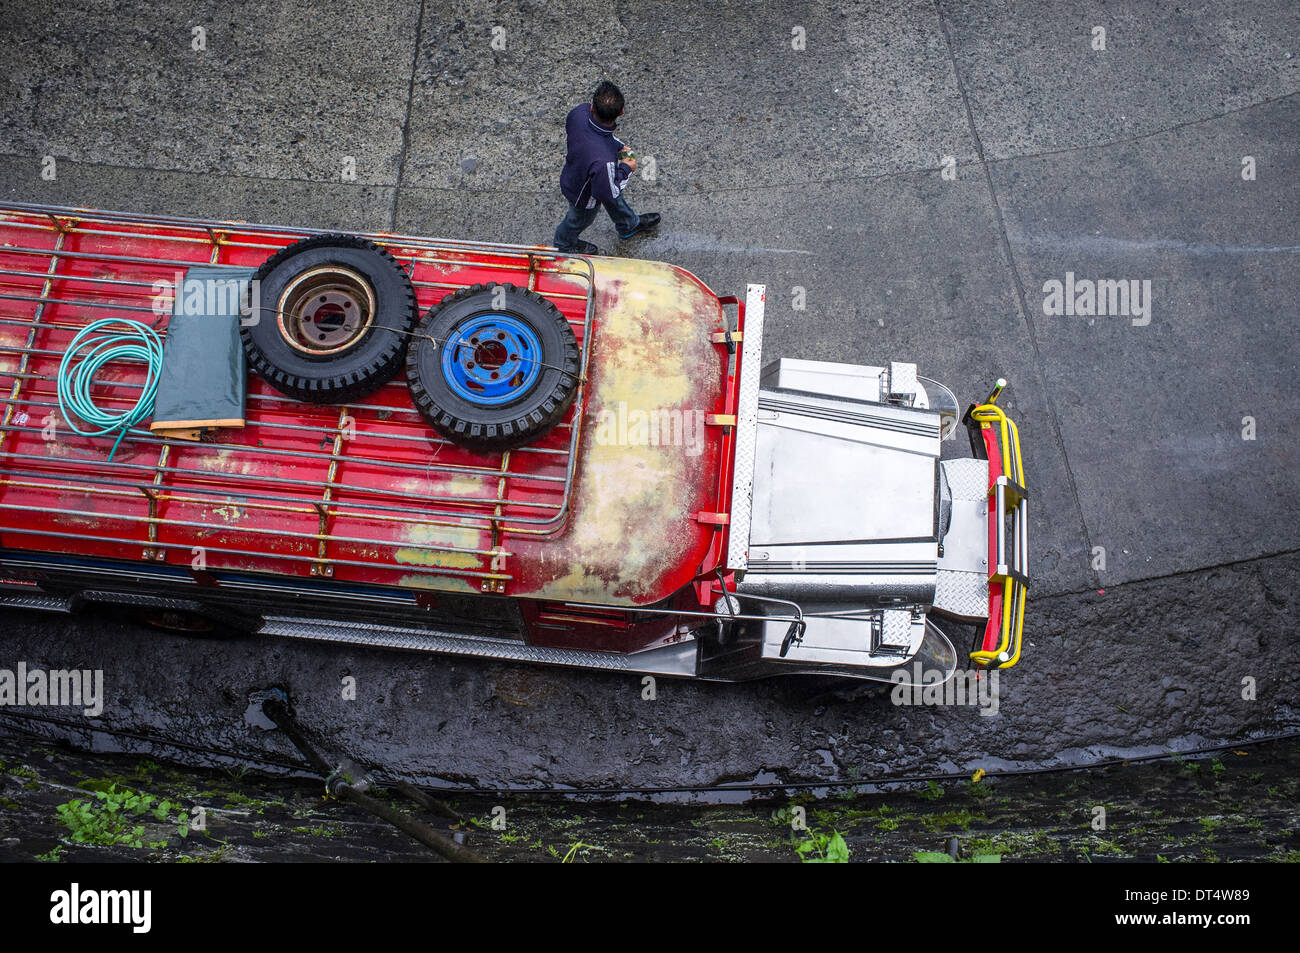 jeepneys on the street, view from above, Philippines Stock Photo